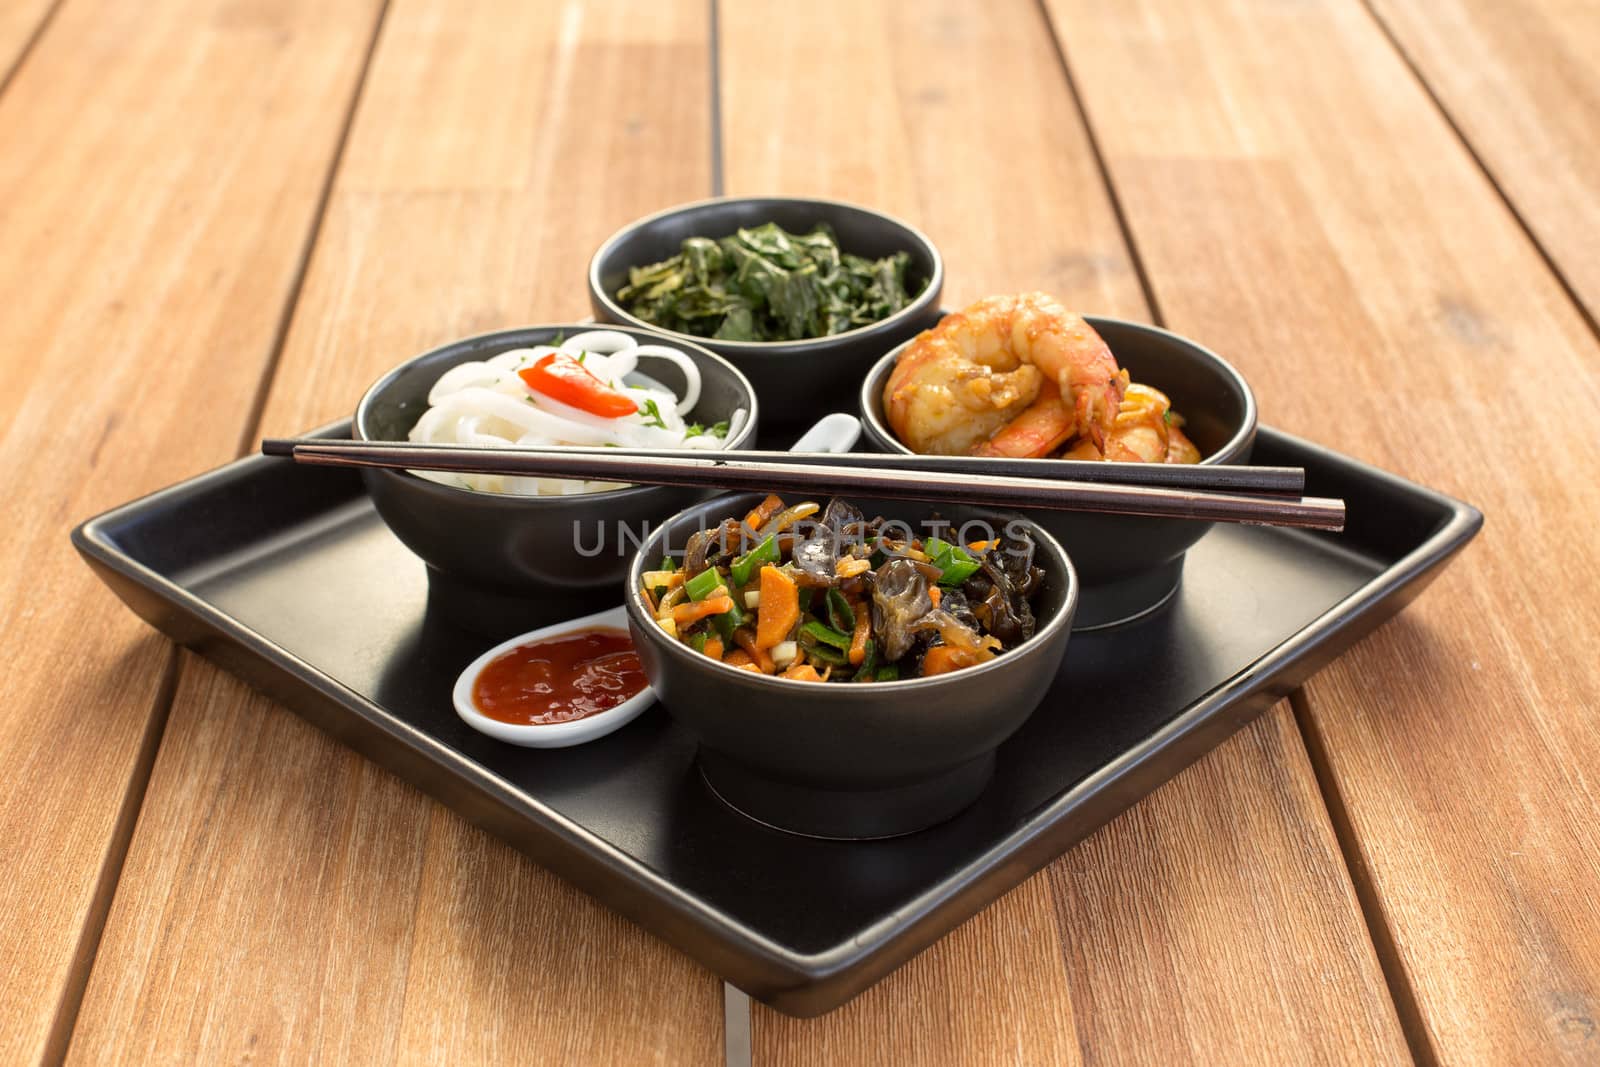 Traditional chinese dish on a square plate in black bowls with shrimp, rice noodles, kale (green cabbage) and fried vegetables. Composed with ceramic spoon with spicy red sauce and chinese chopsticks. Composition on a old styled wooden table.